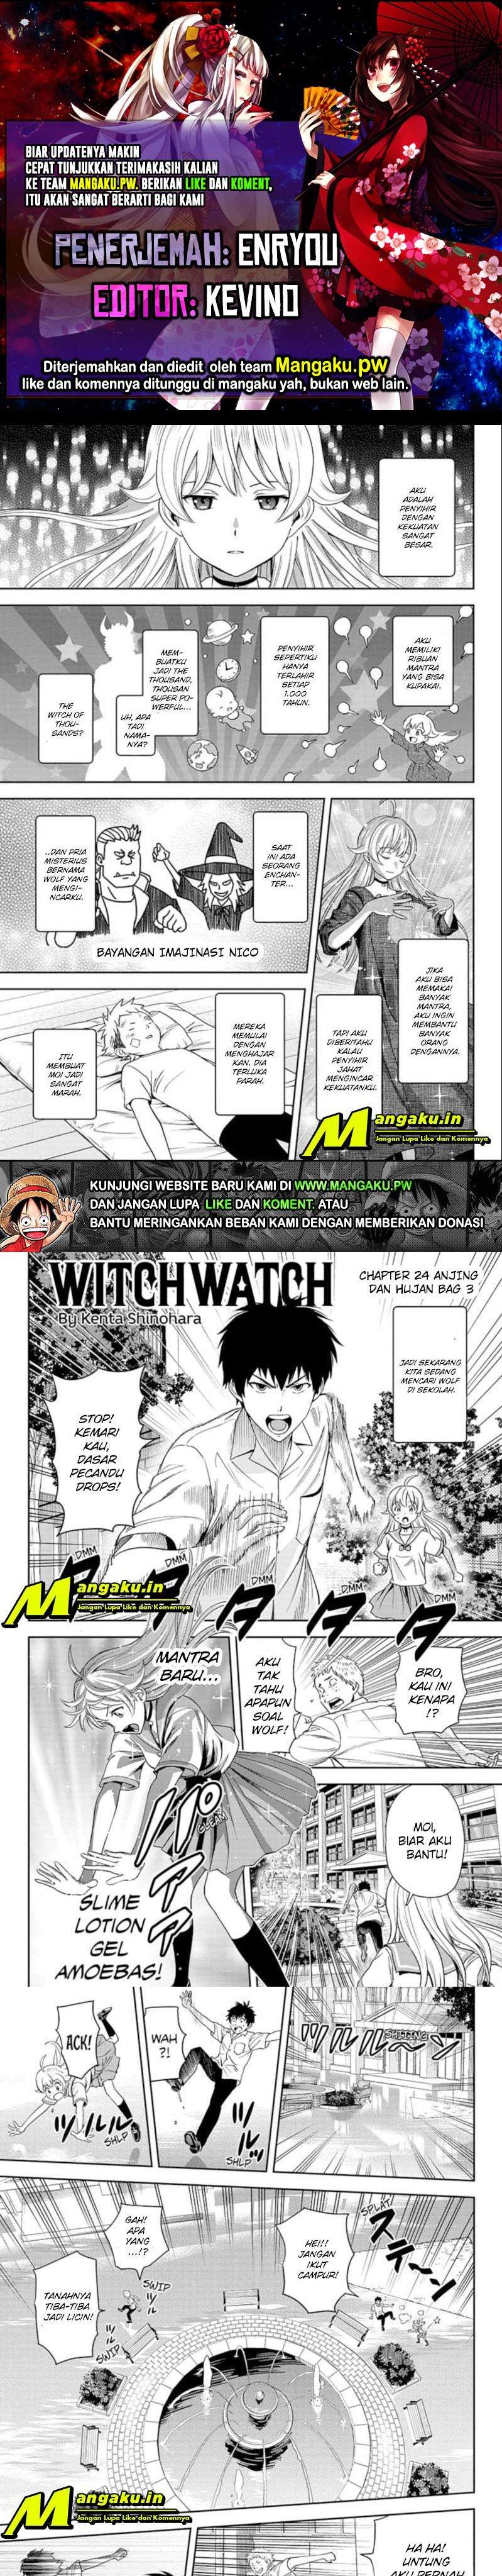 Witch Watch Chapter 24 1